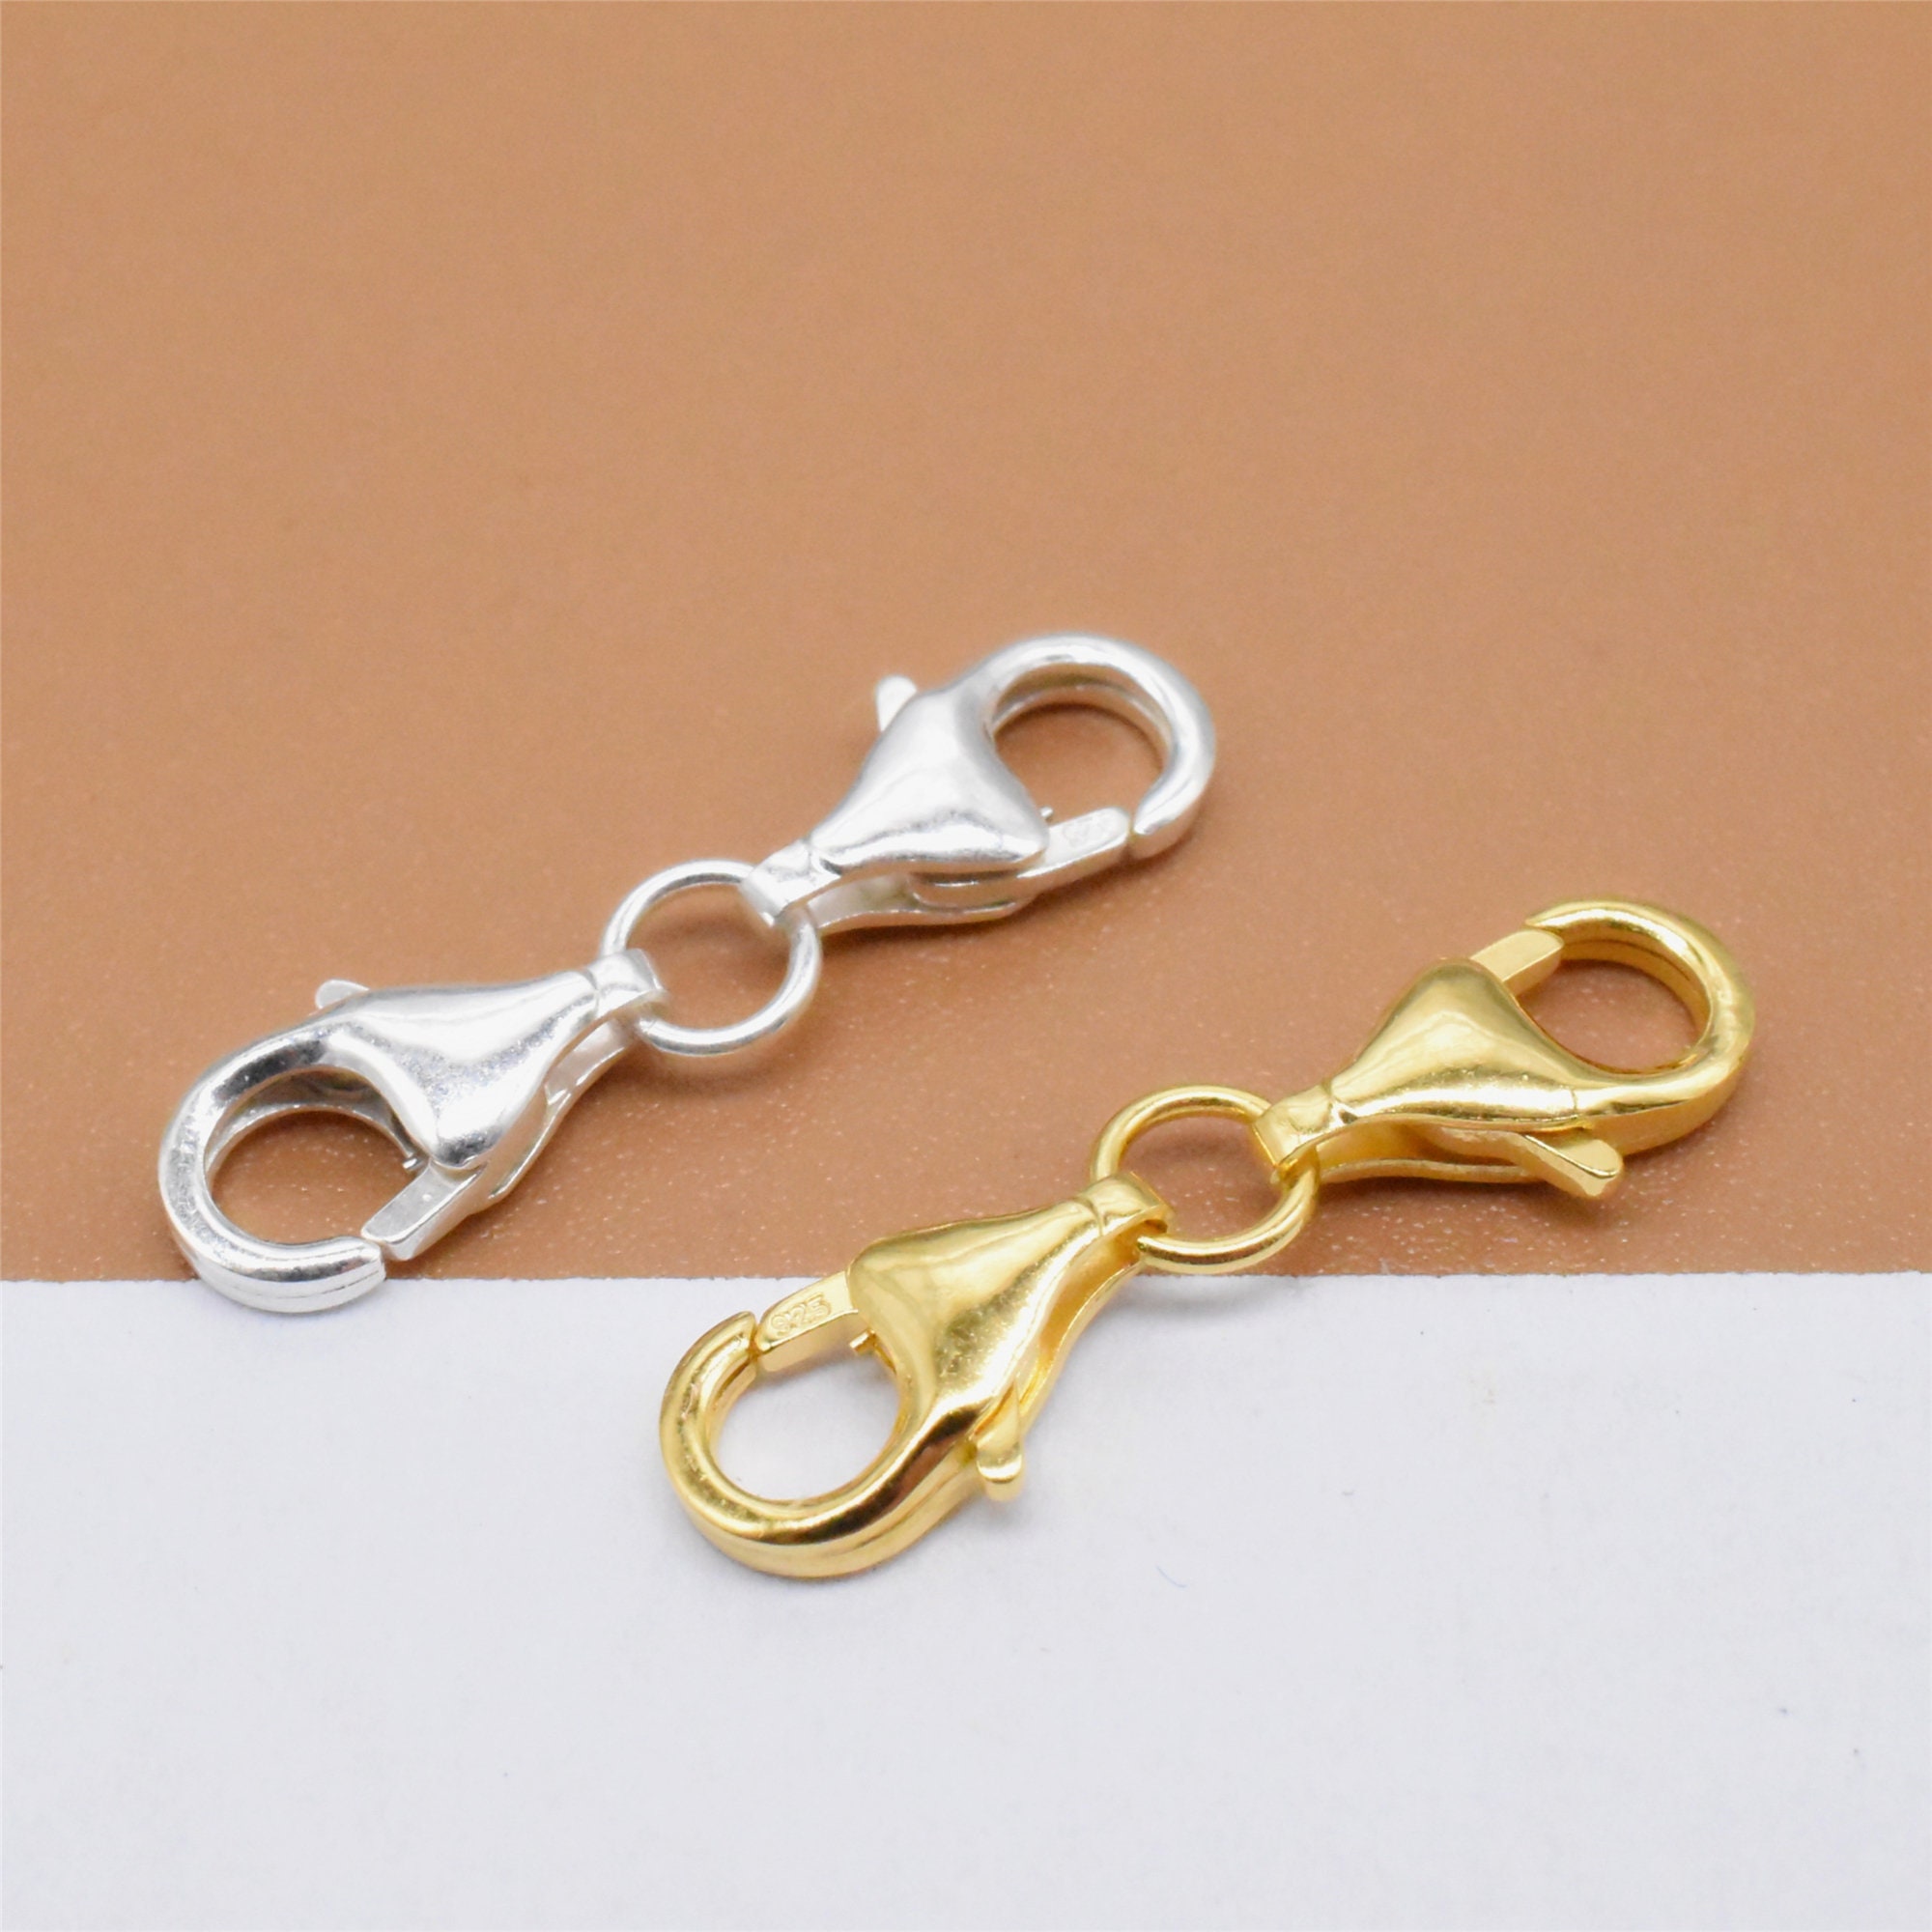 2pcs Double Lobster Clasp Extender, 925 Sterling Silver Bracelet Extender  Clasp Jewelry Lobster Clasp and Closures Double Claw Connector for Necklace